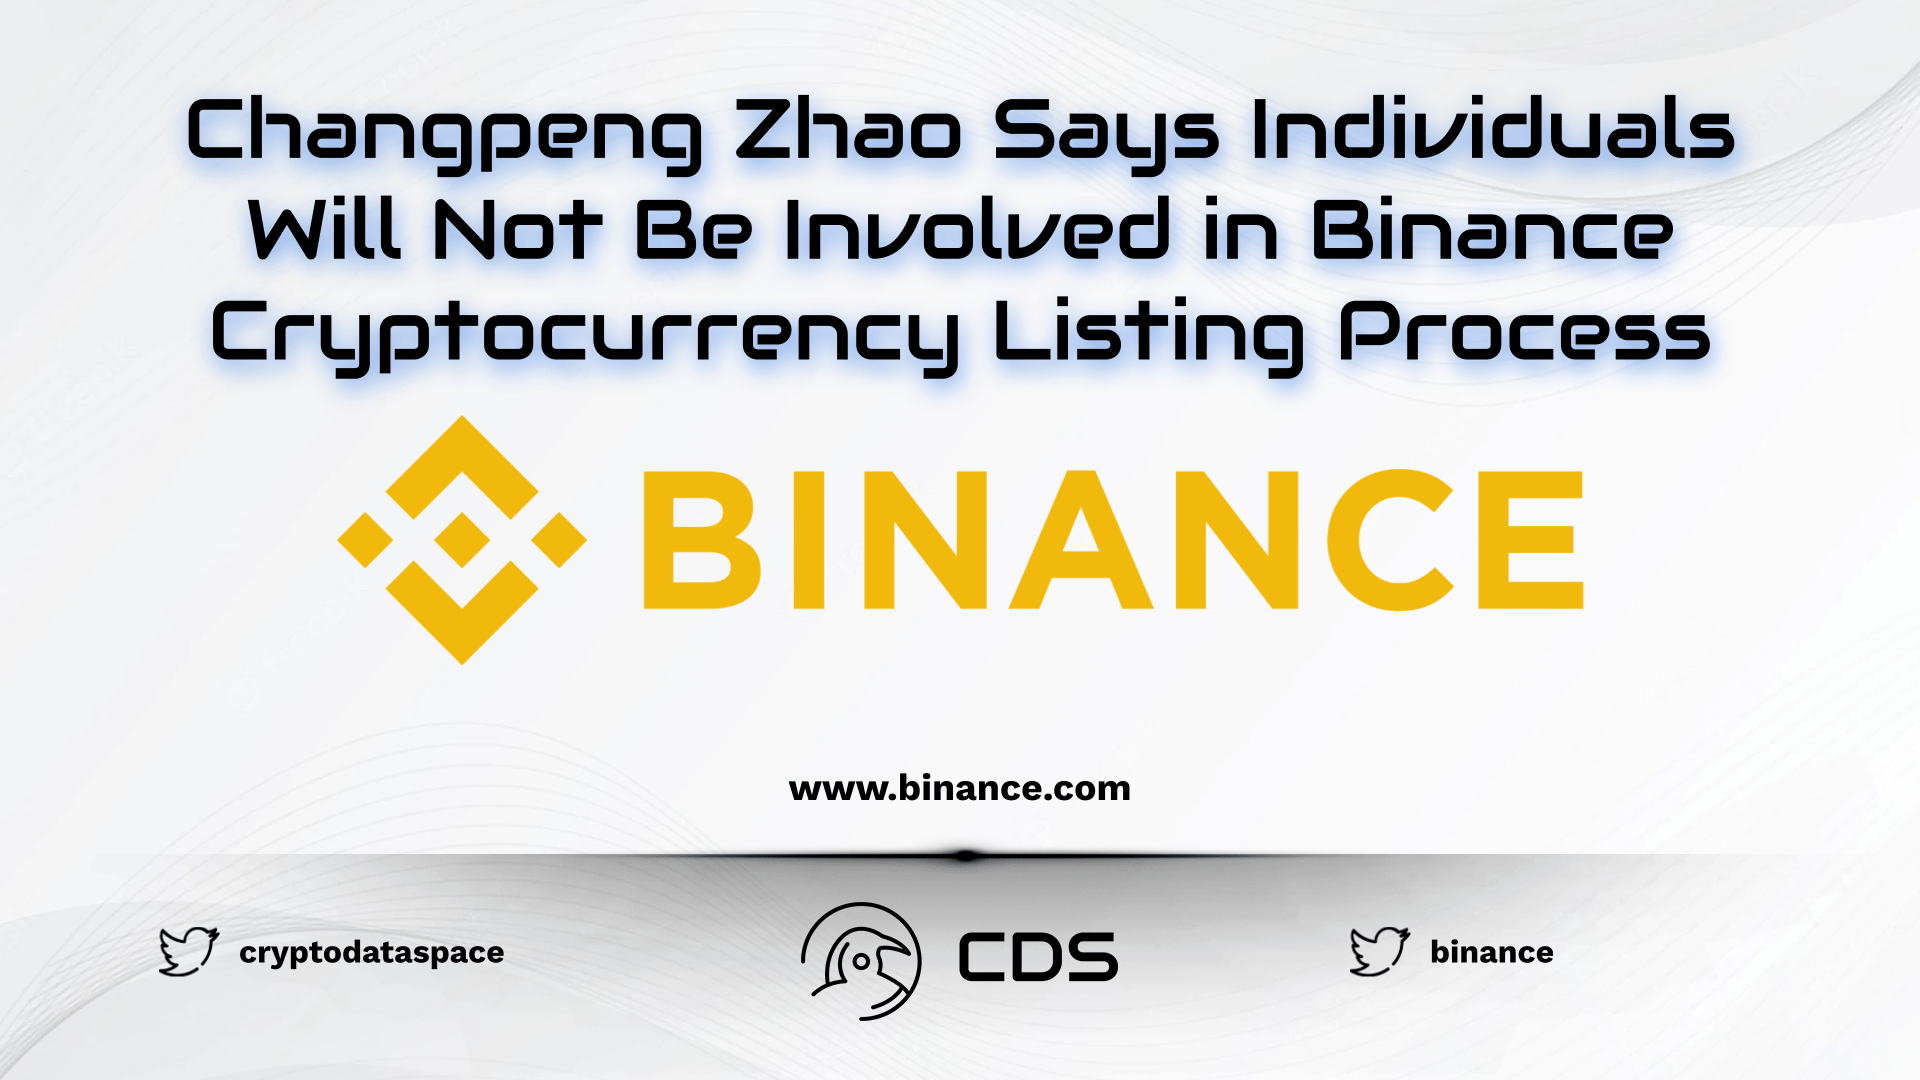 Changpeng Zhao Says Individuals Will Not Be Involved in Binance Cryptocurrency Listing Process